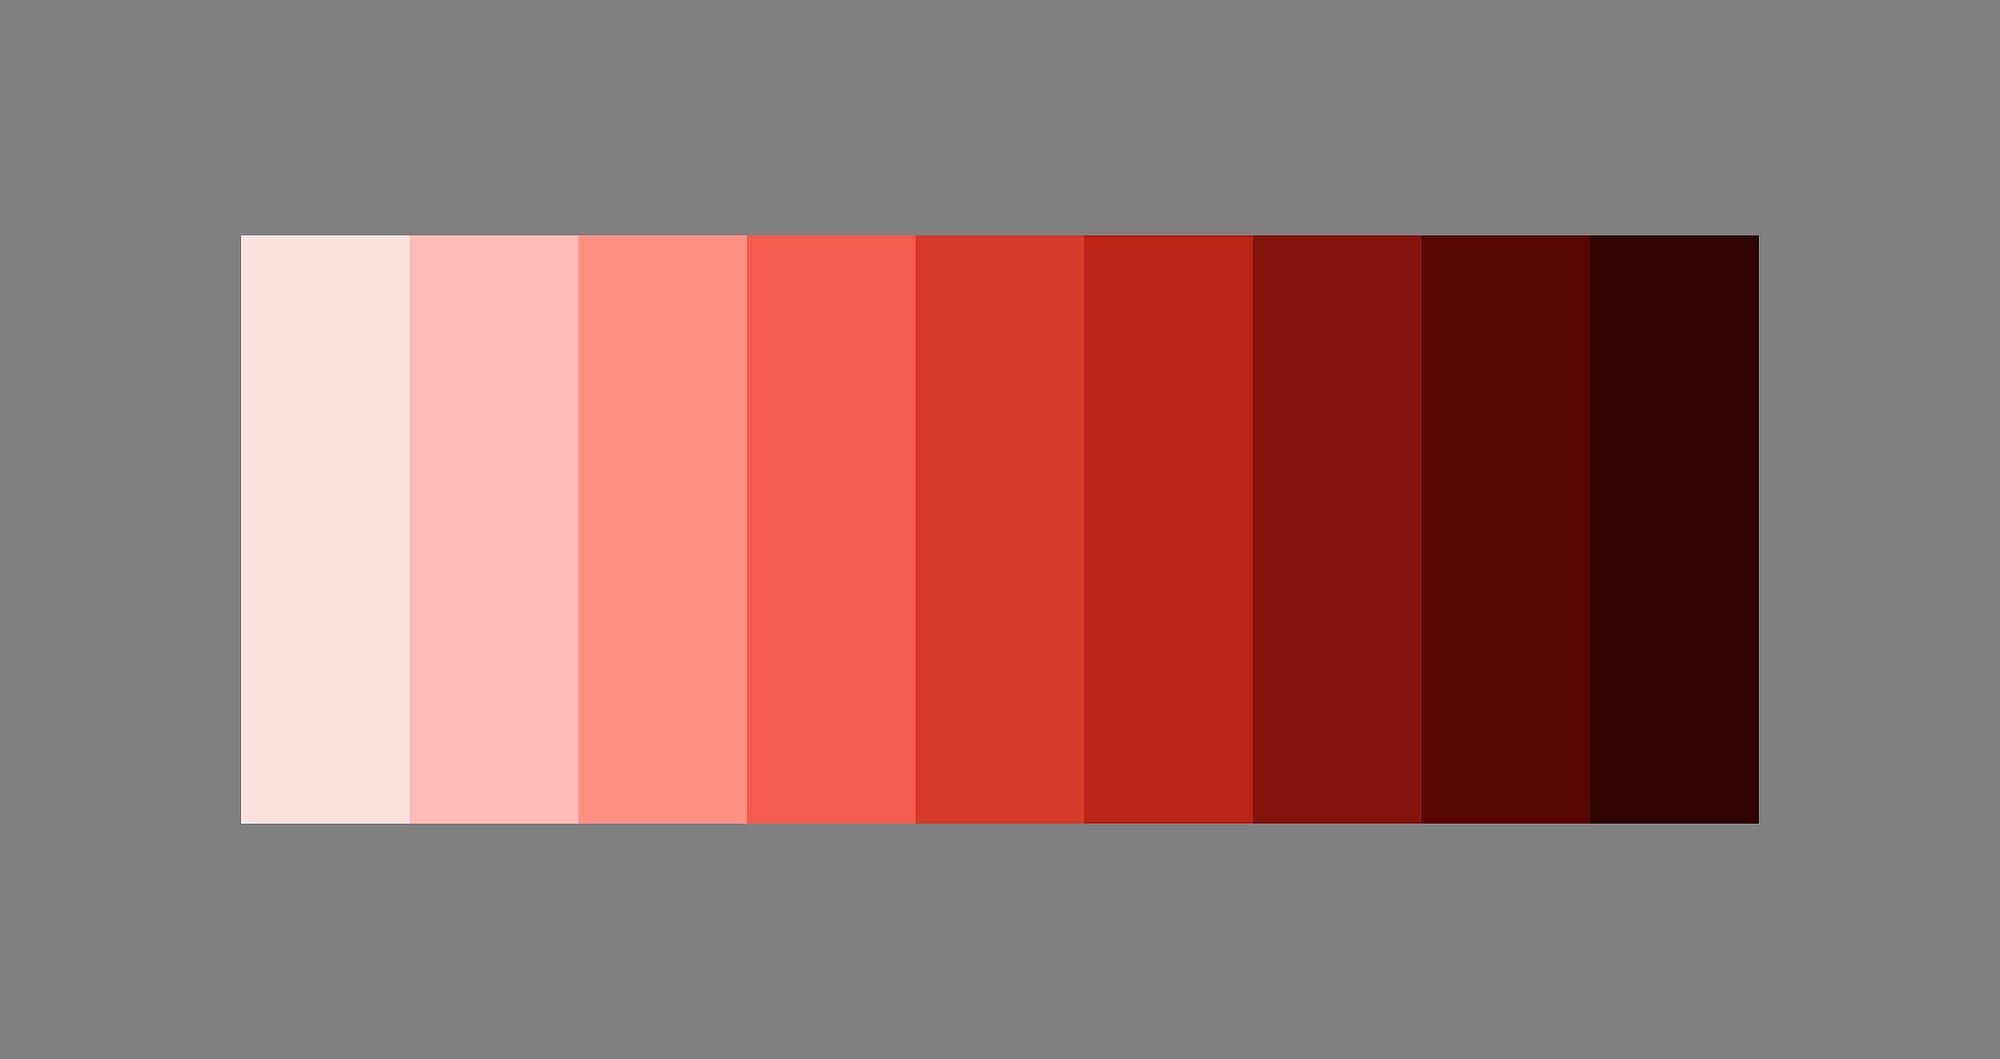 How to make your own color palettes | by Greg Gunn | Medium